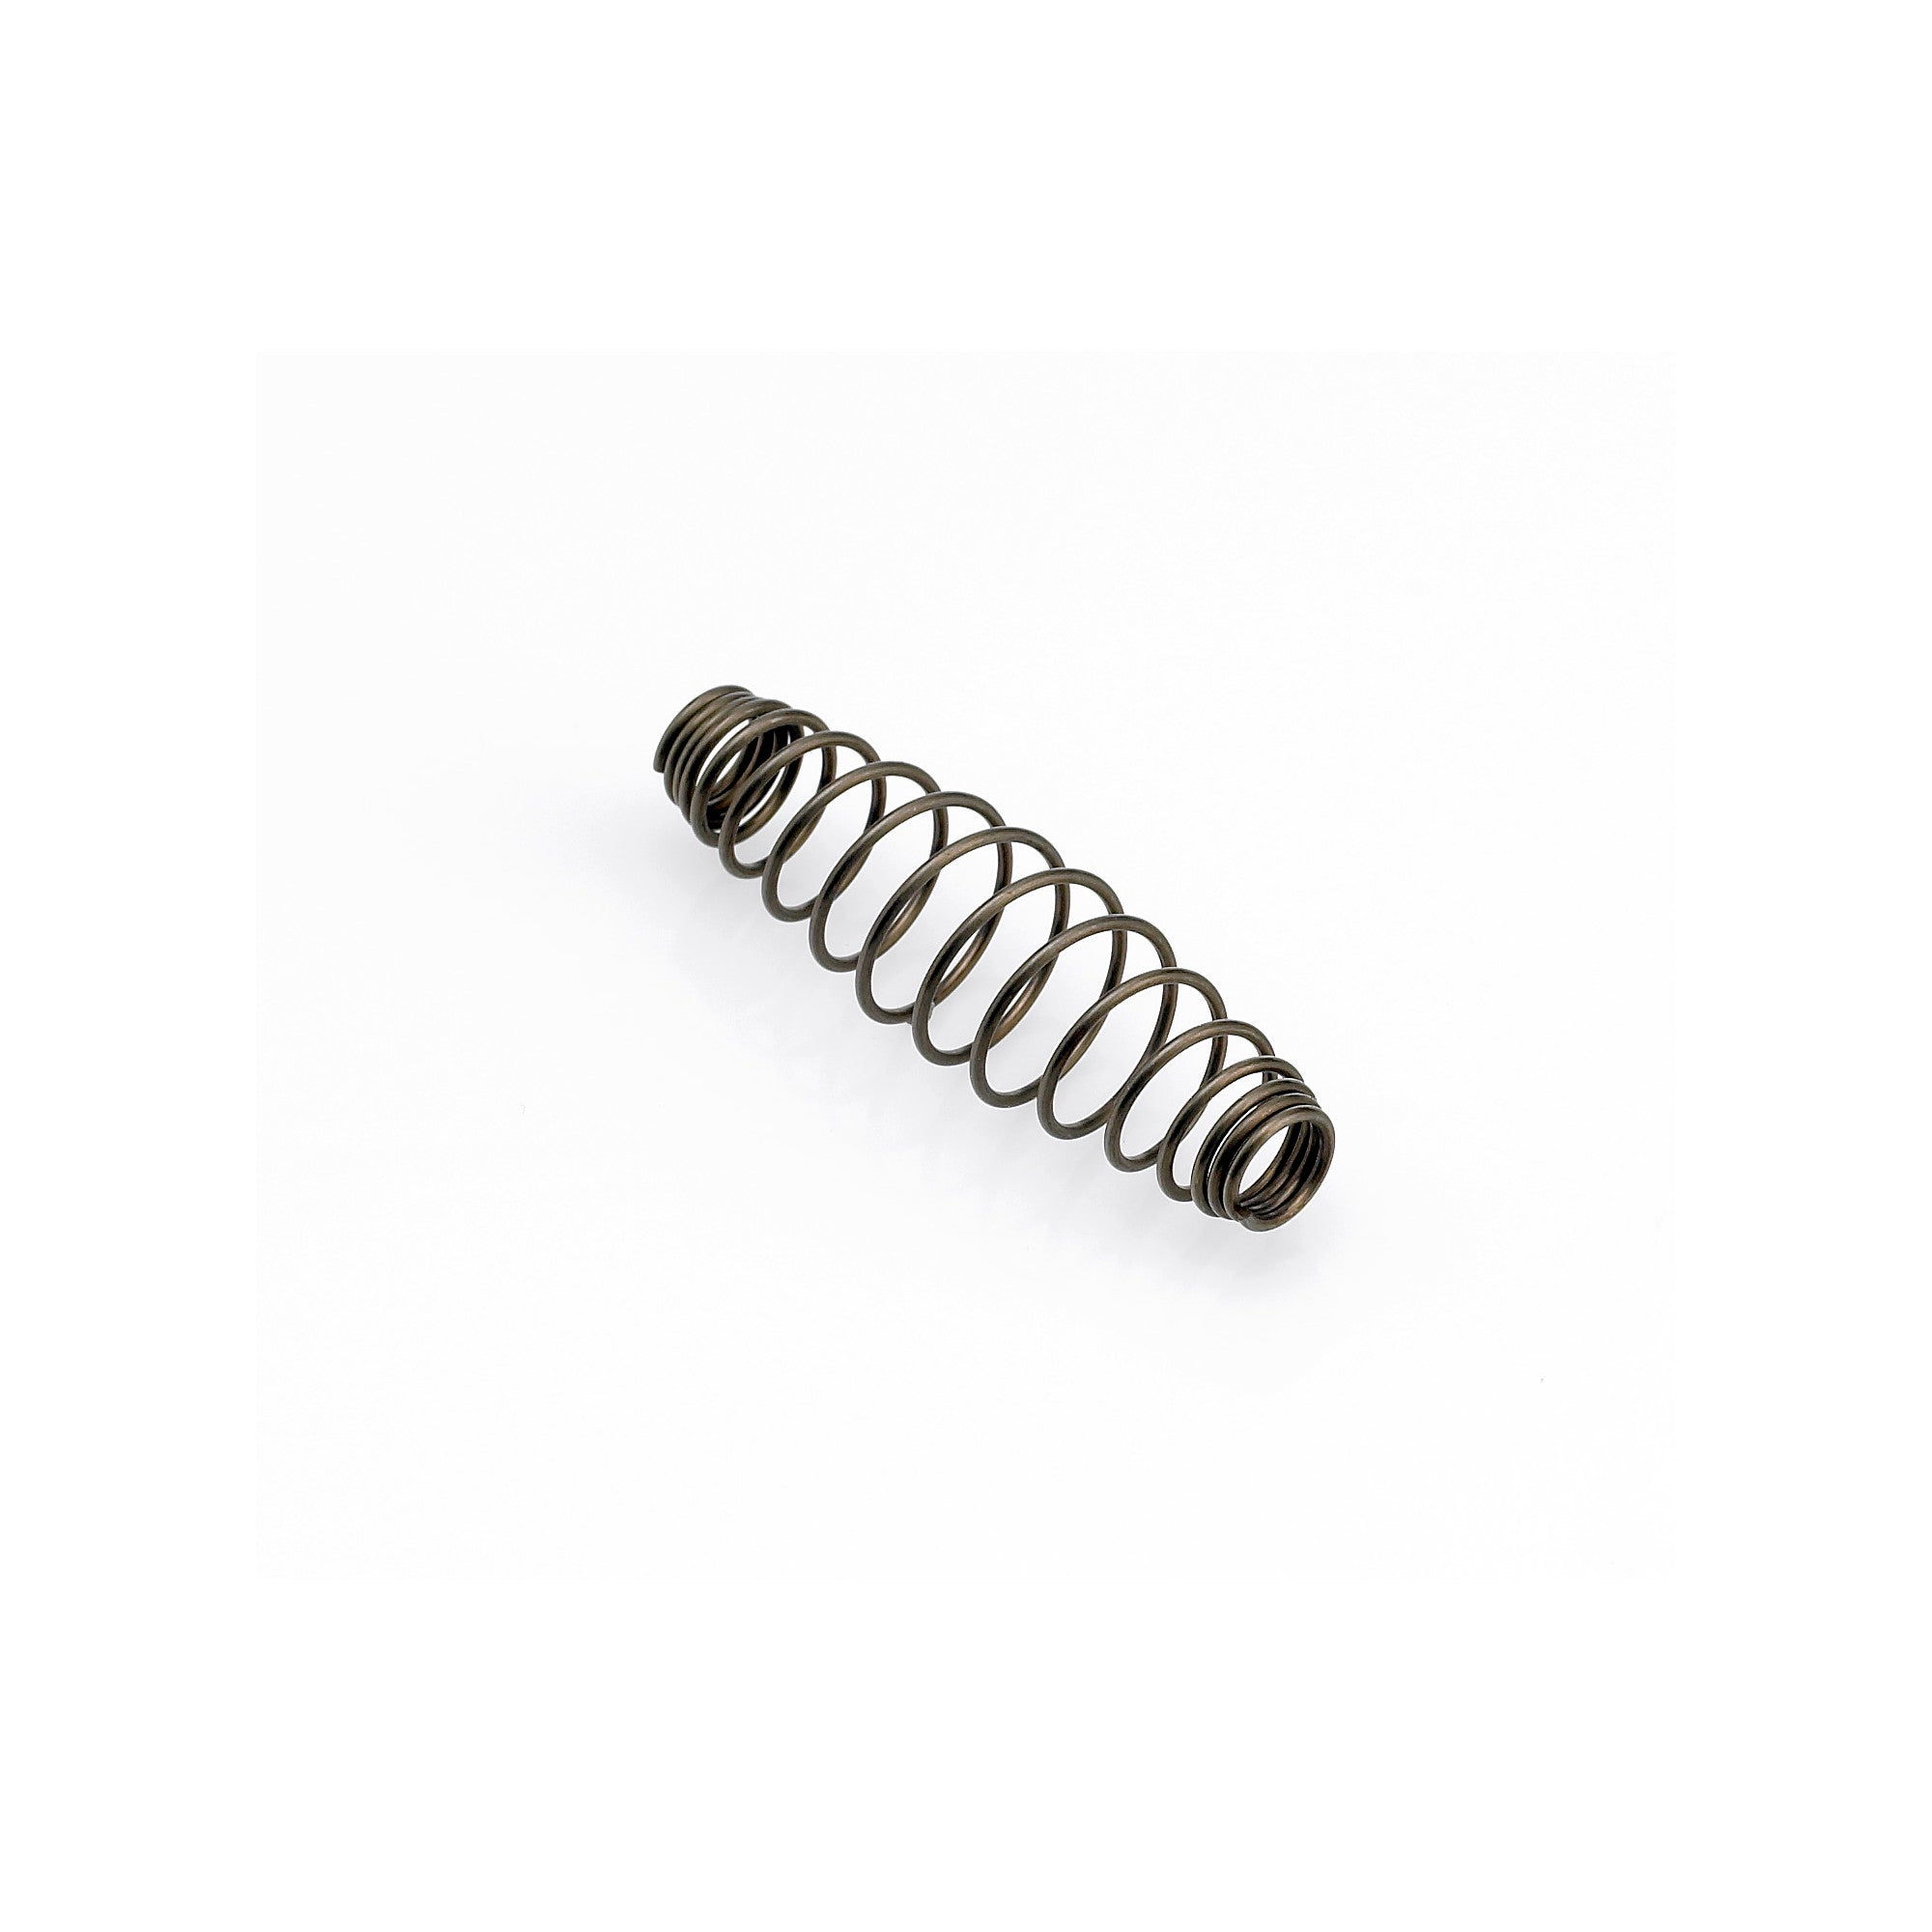 Replacement Spring for Shear